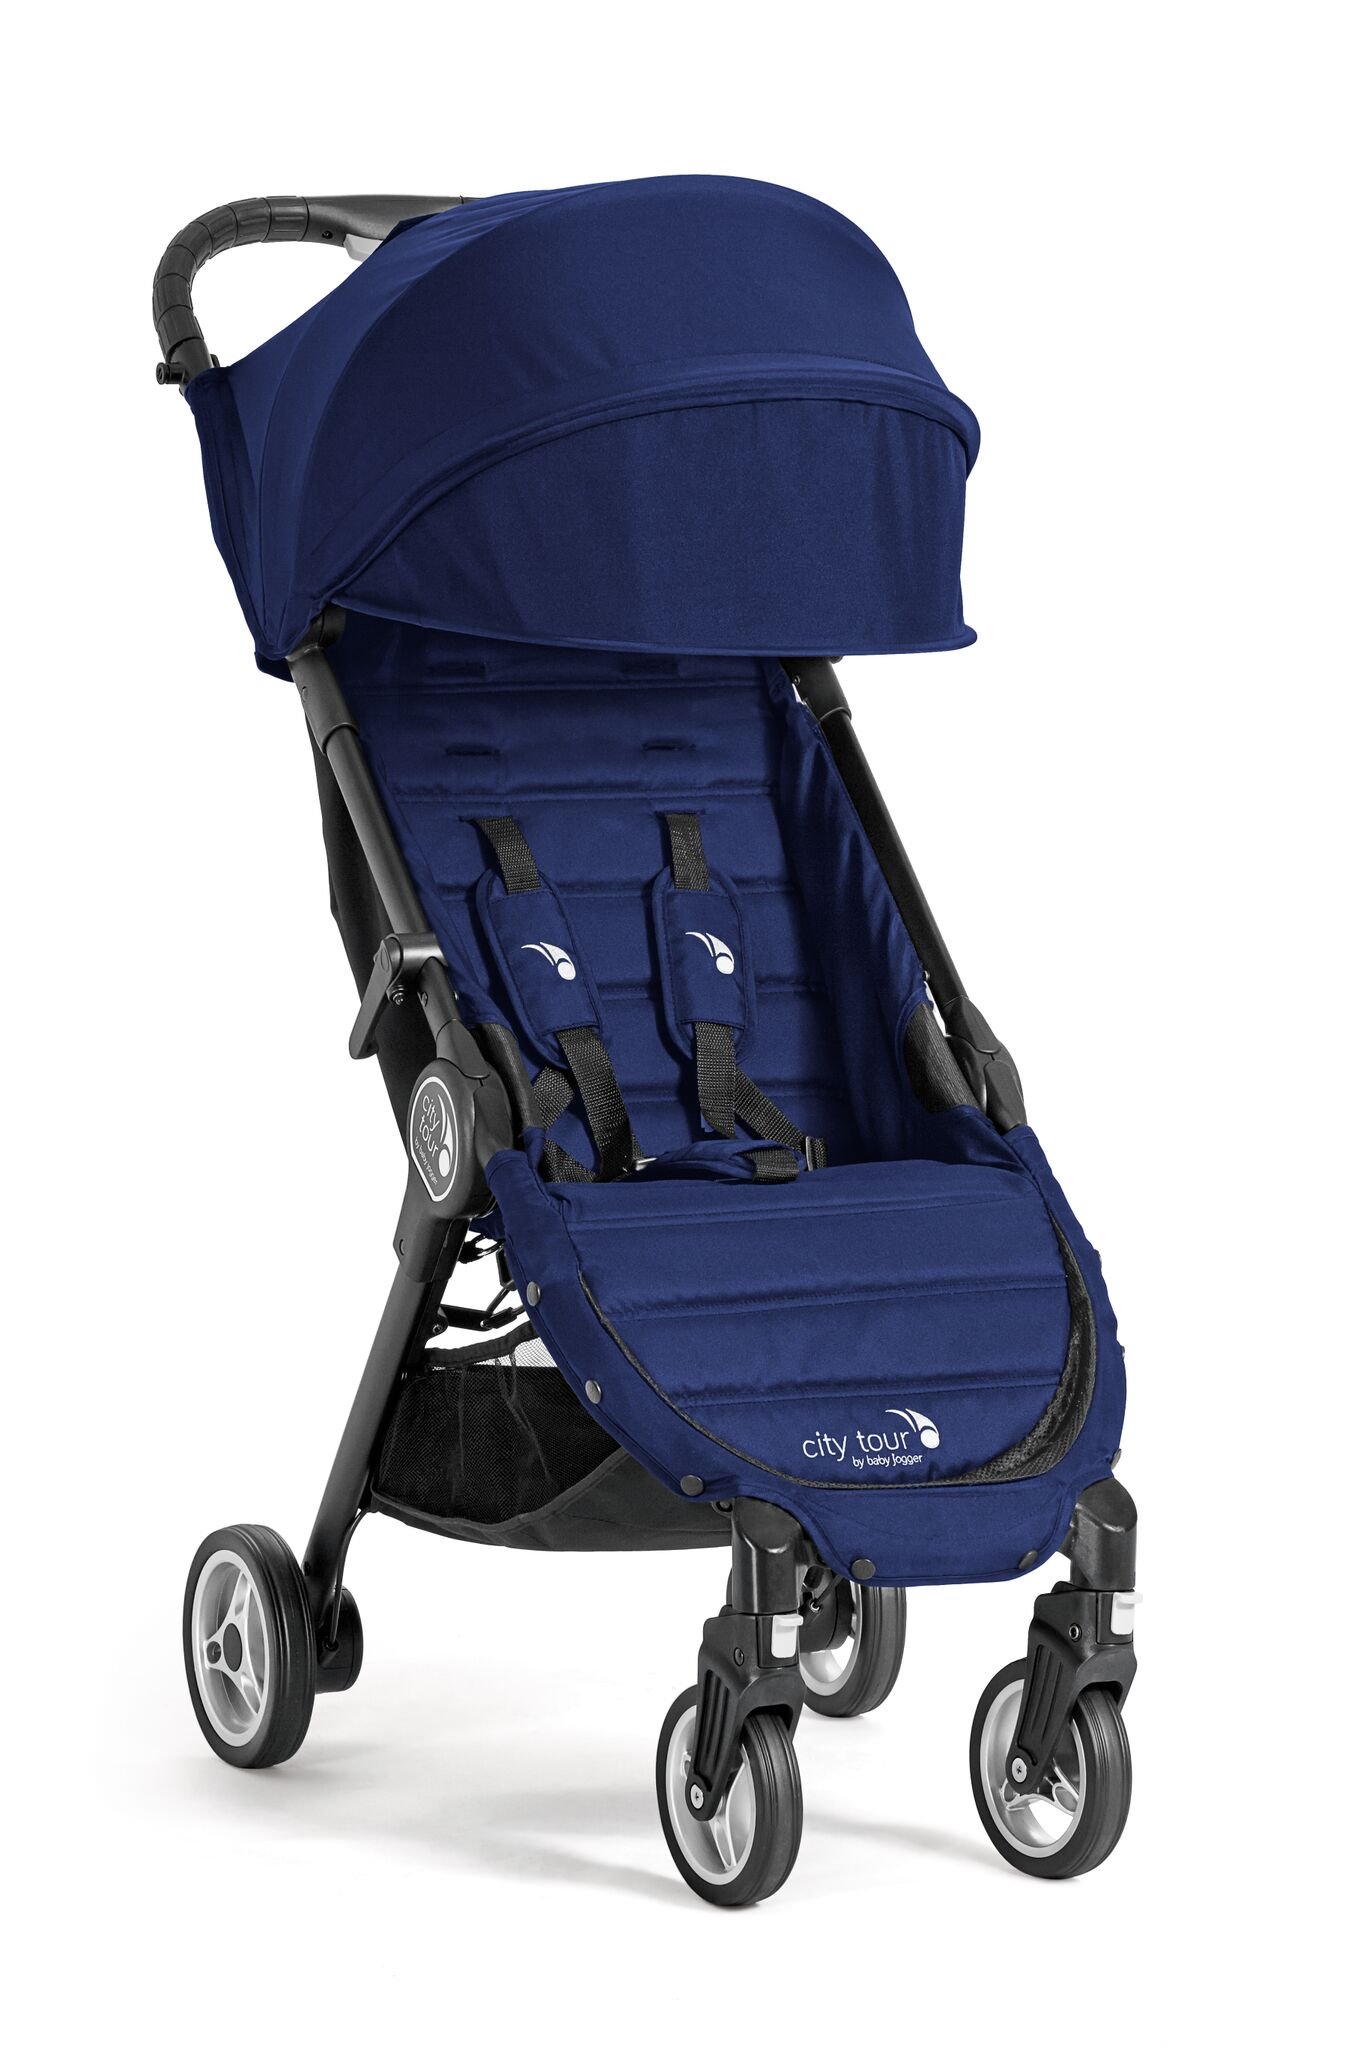 Baby Jogger City Tour - HIRE ONLY - Baby On The Move